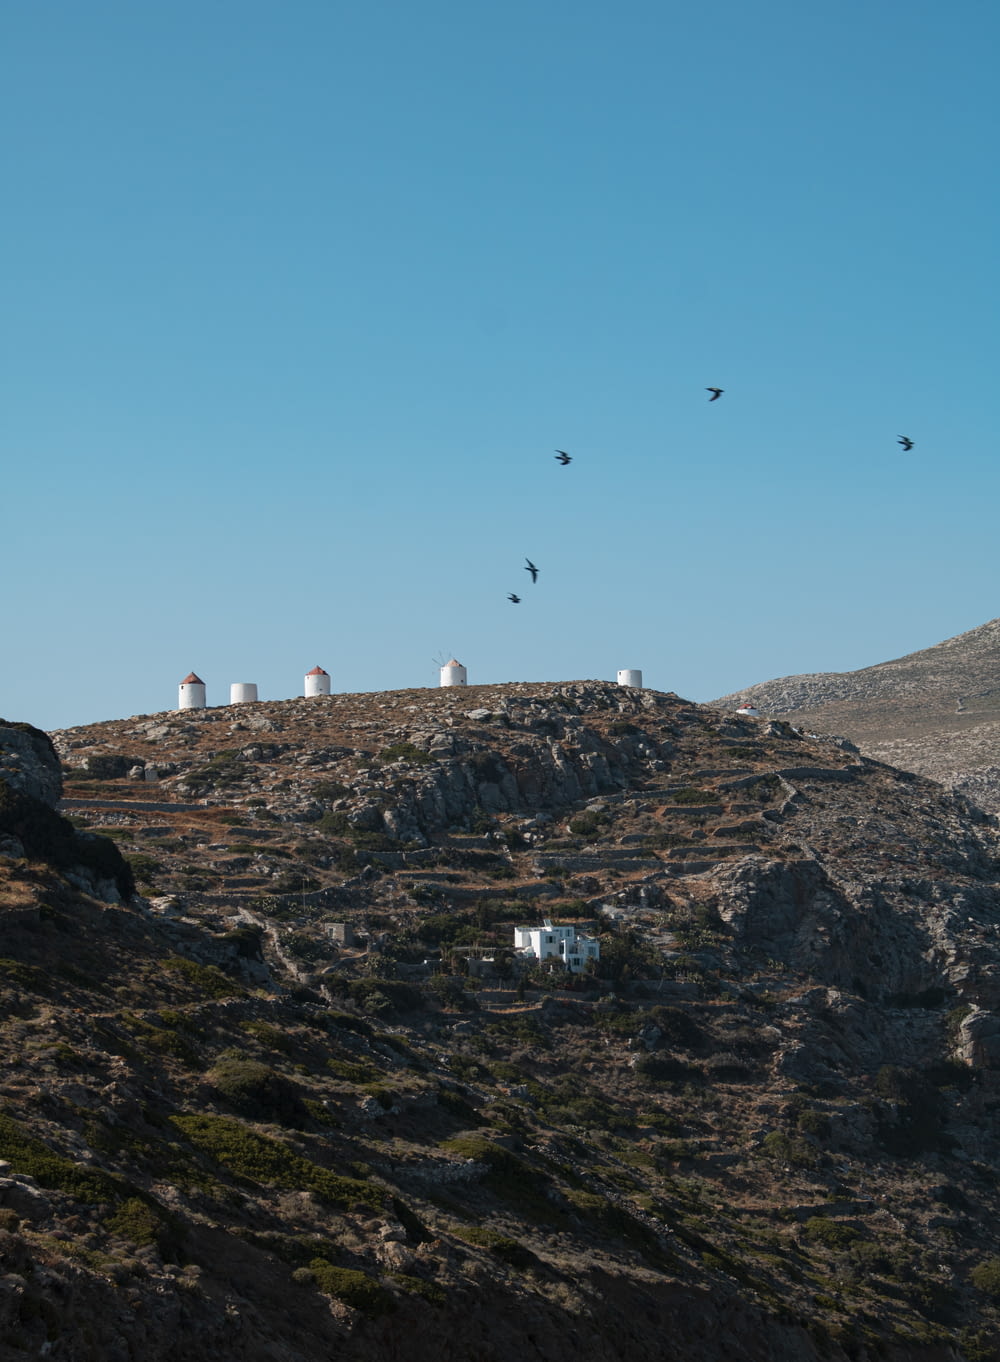 a group of white buildings on a rocky hill